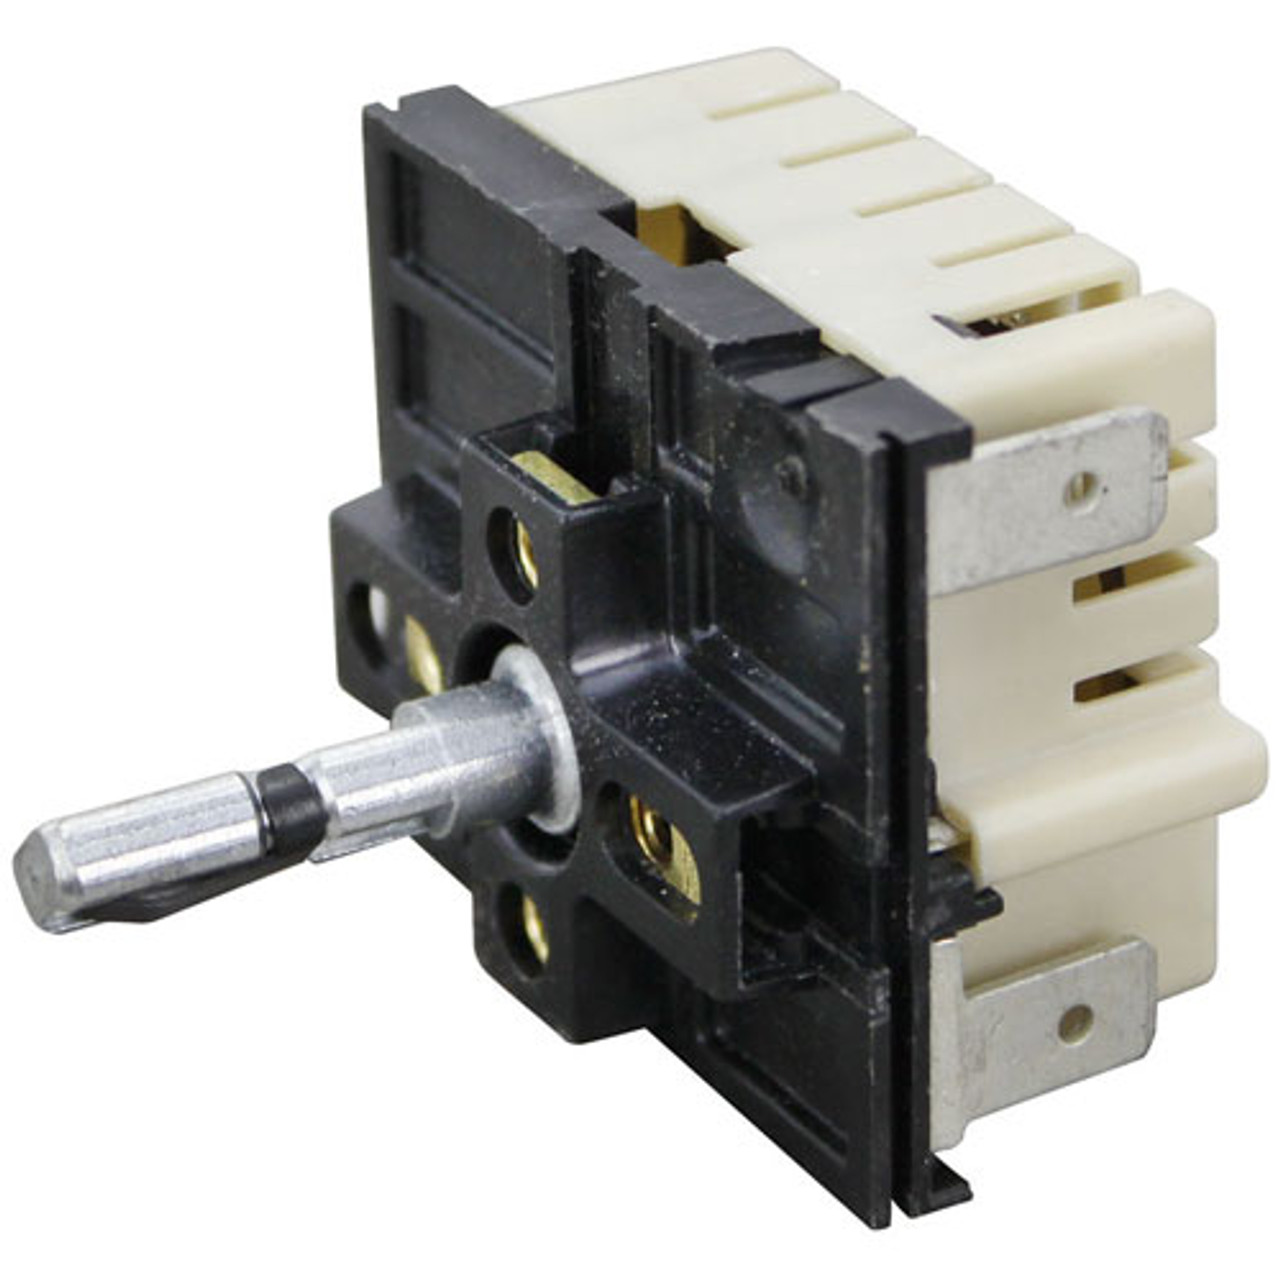 Infinite Heat Switch - Replacement Part For Merco 20021